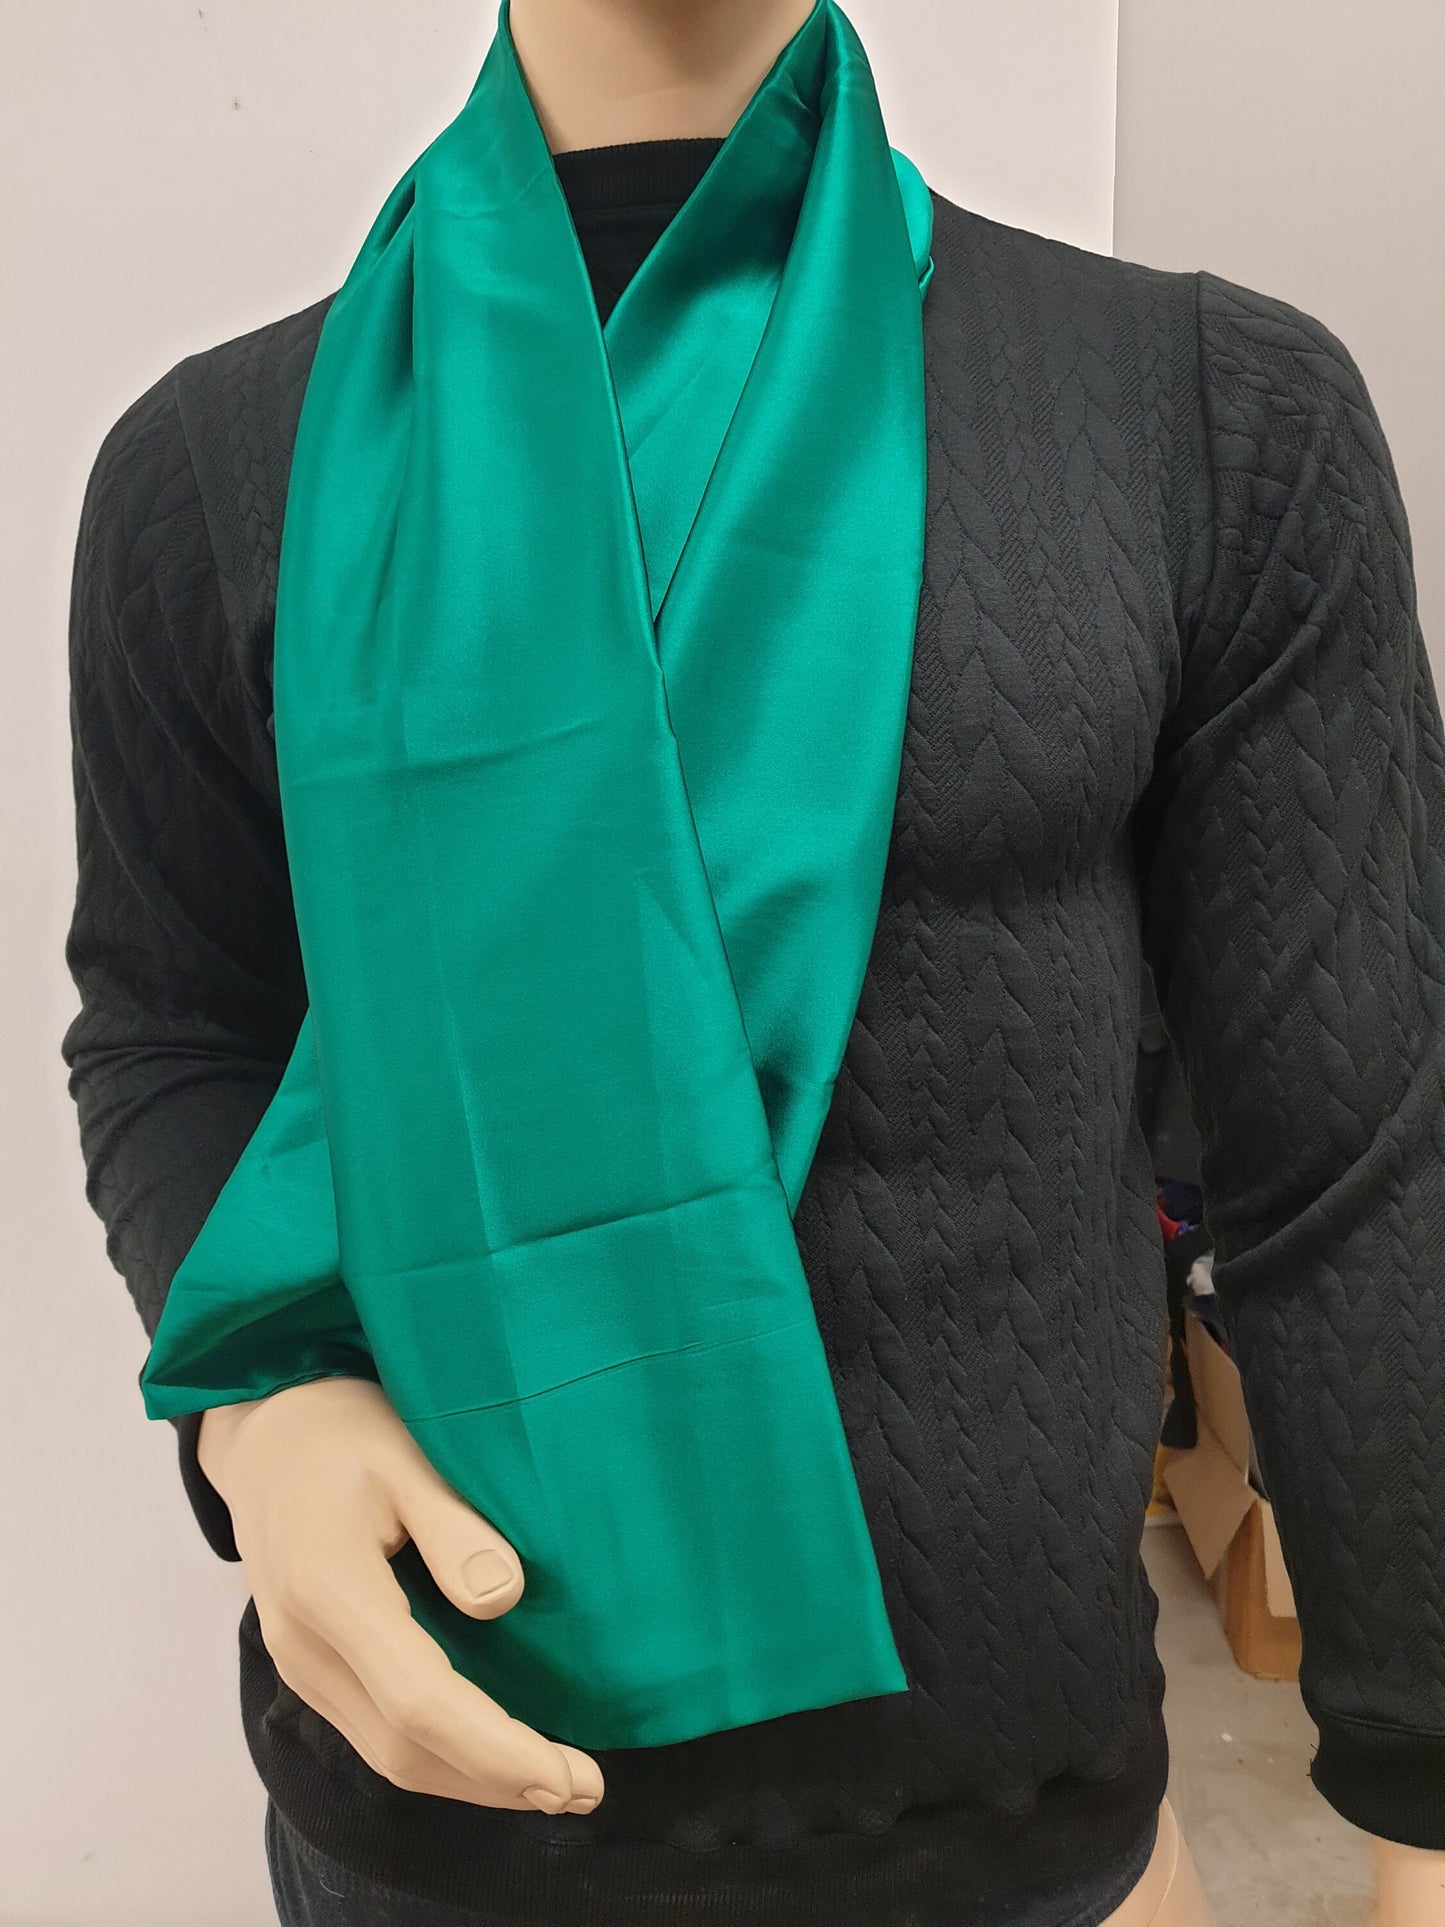 GREEN hight quality silk scarf, hand made in France.